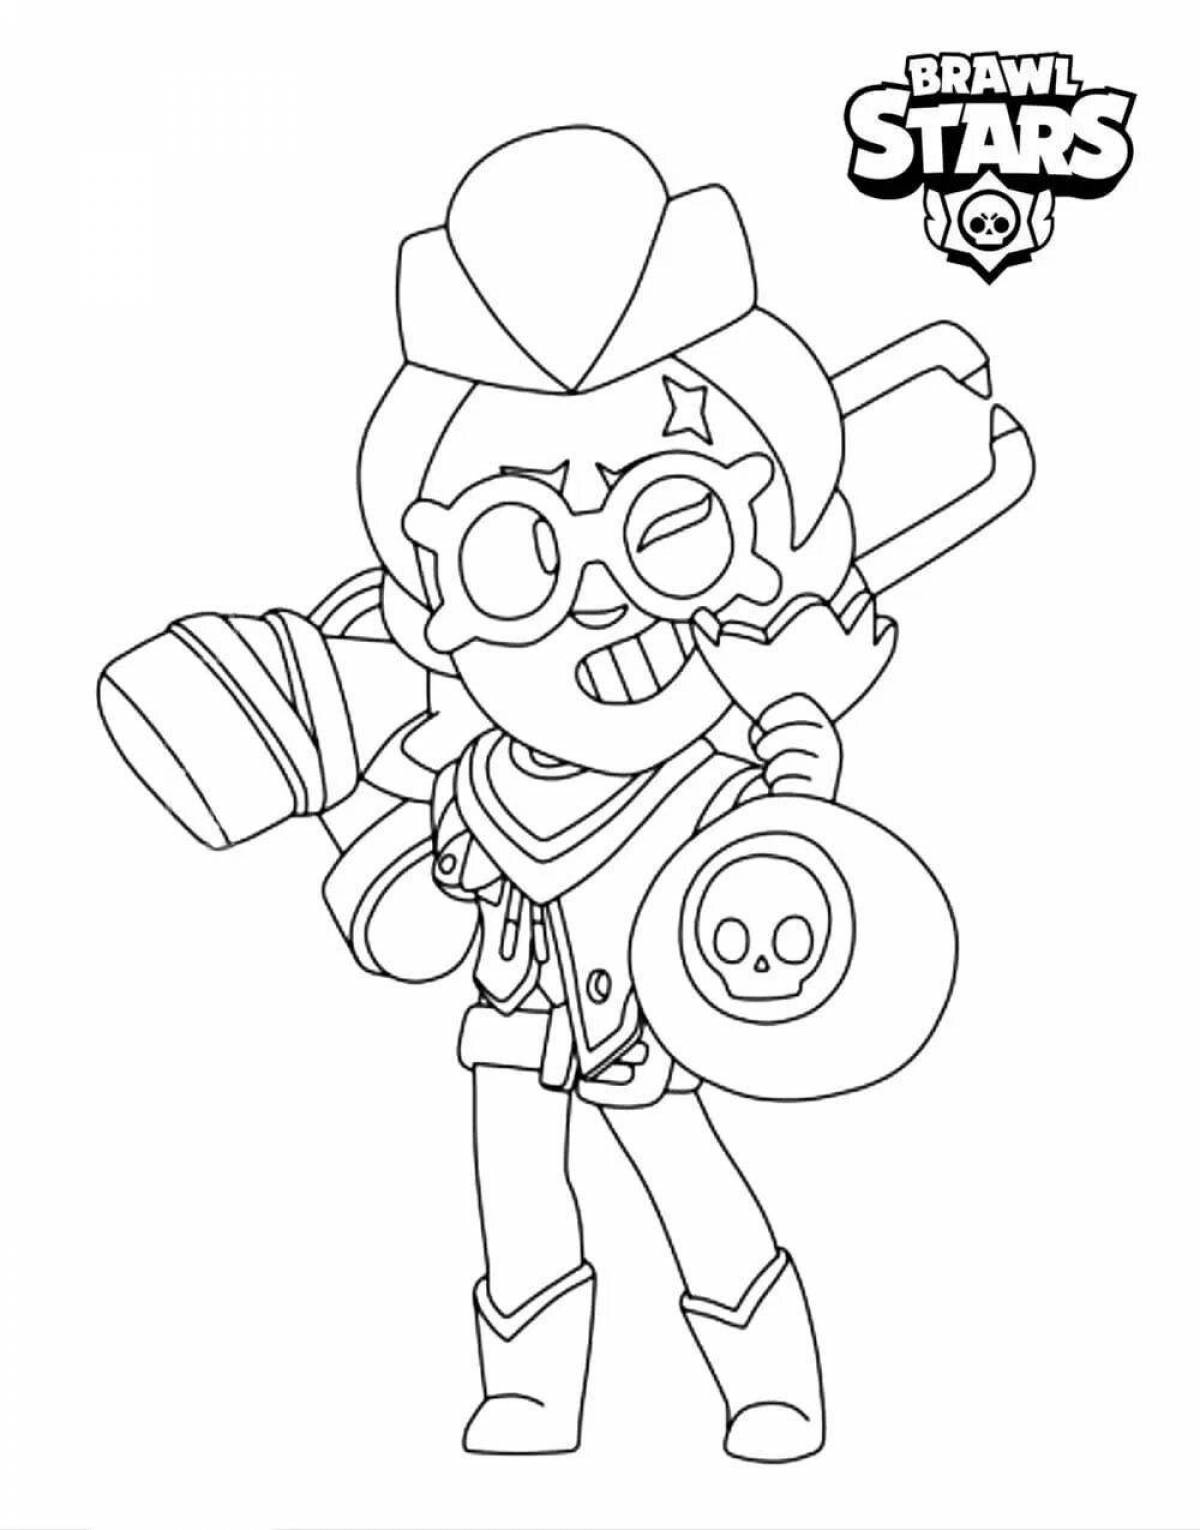 Coloring page energetic fighters brawl stars